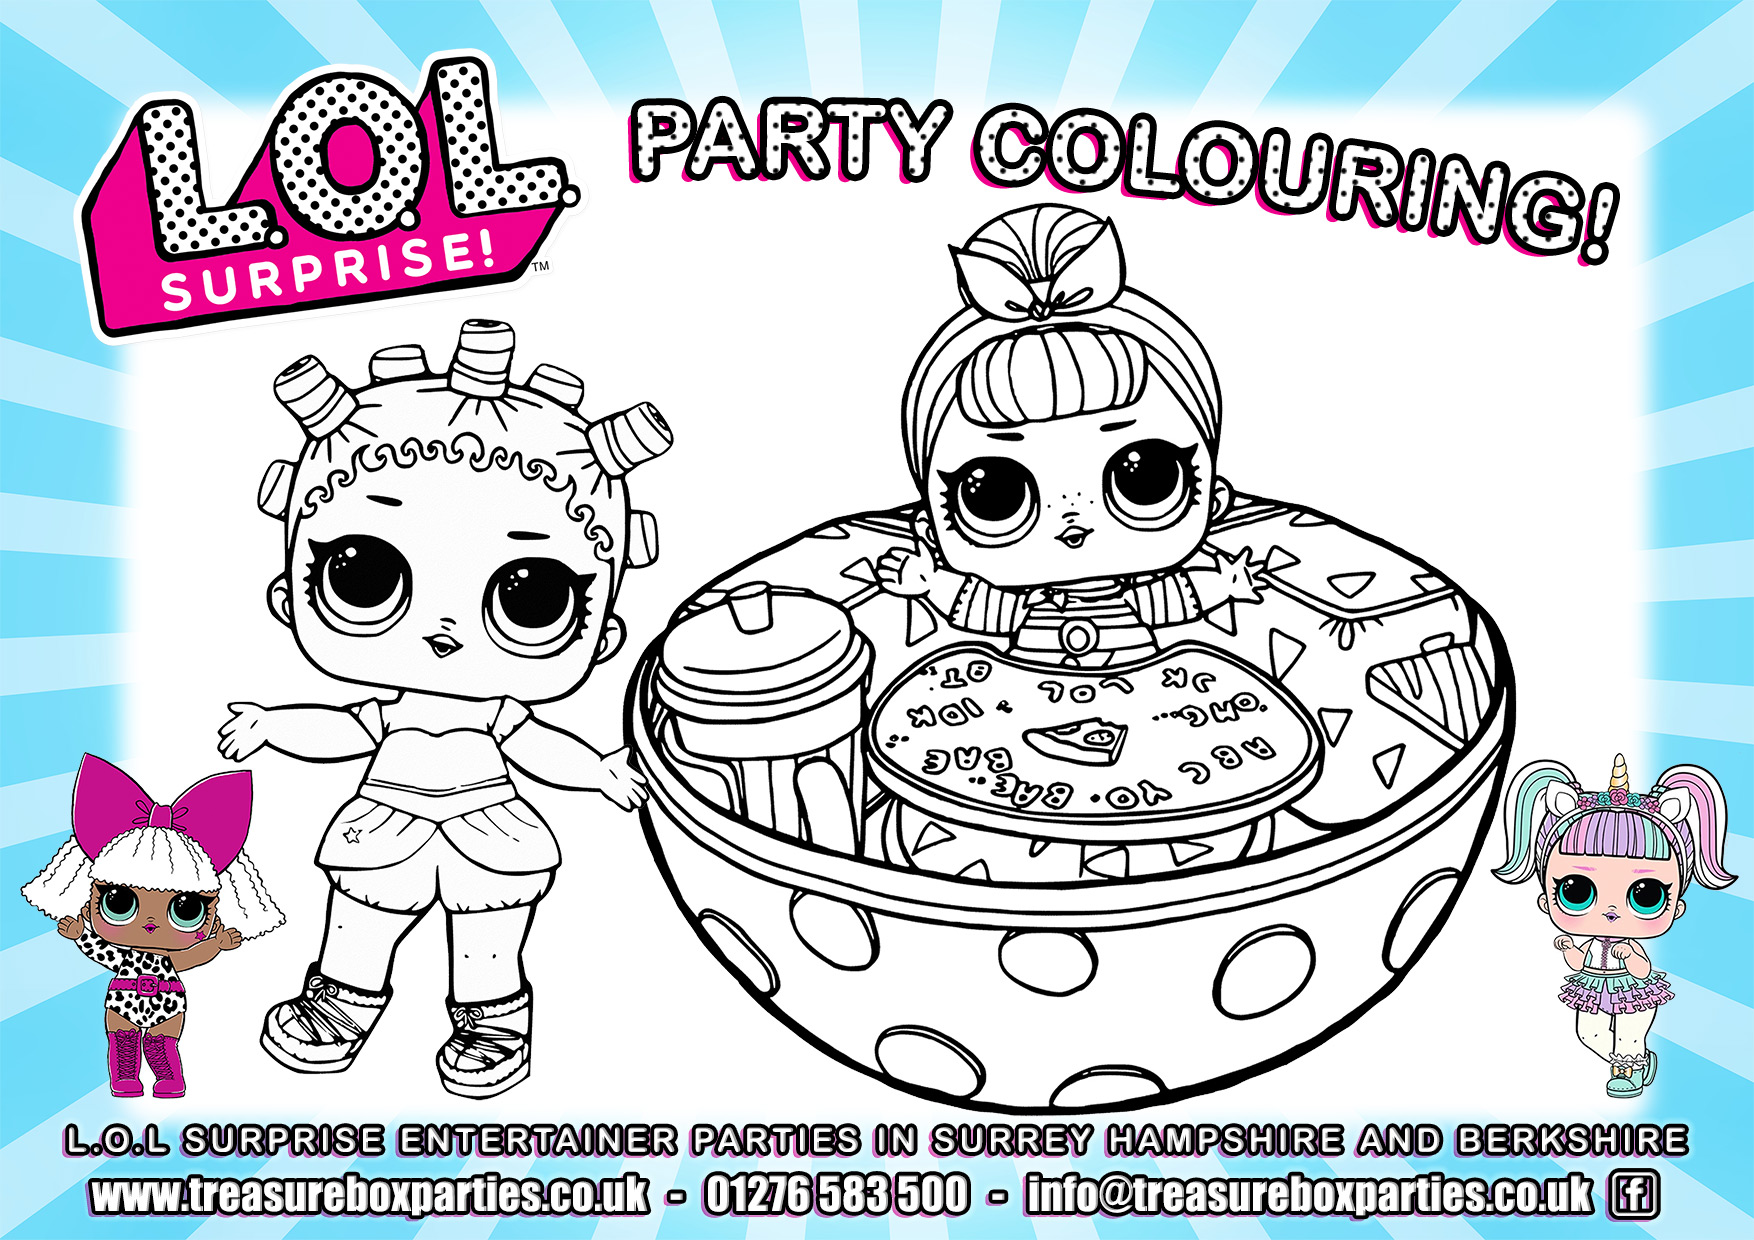 LOL Birthday Party Printable Colouring 02